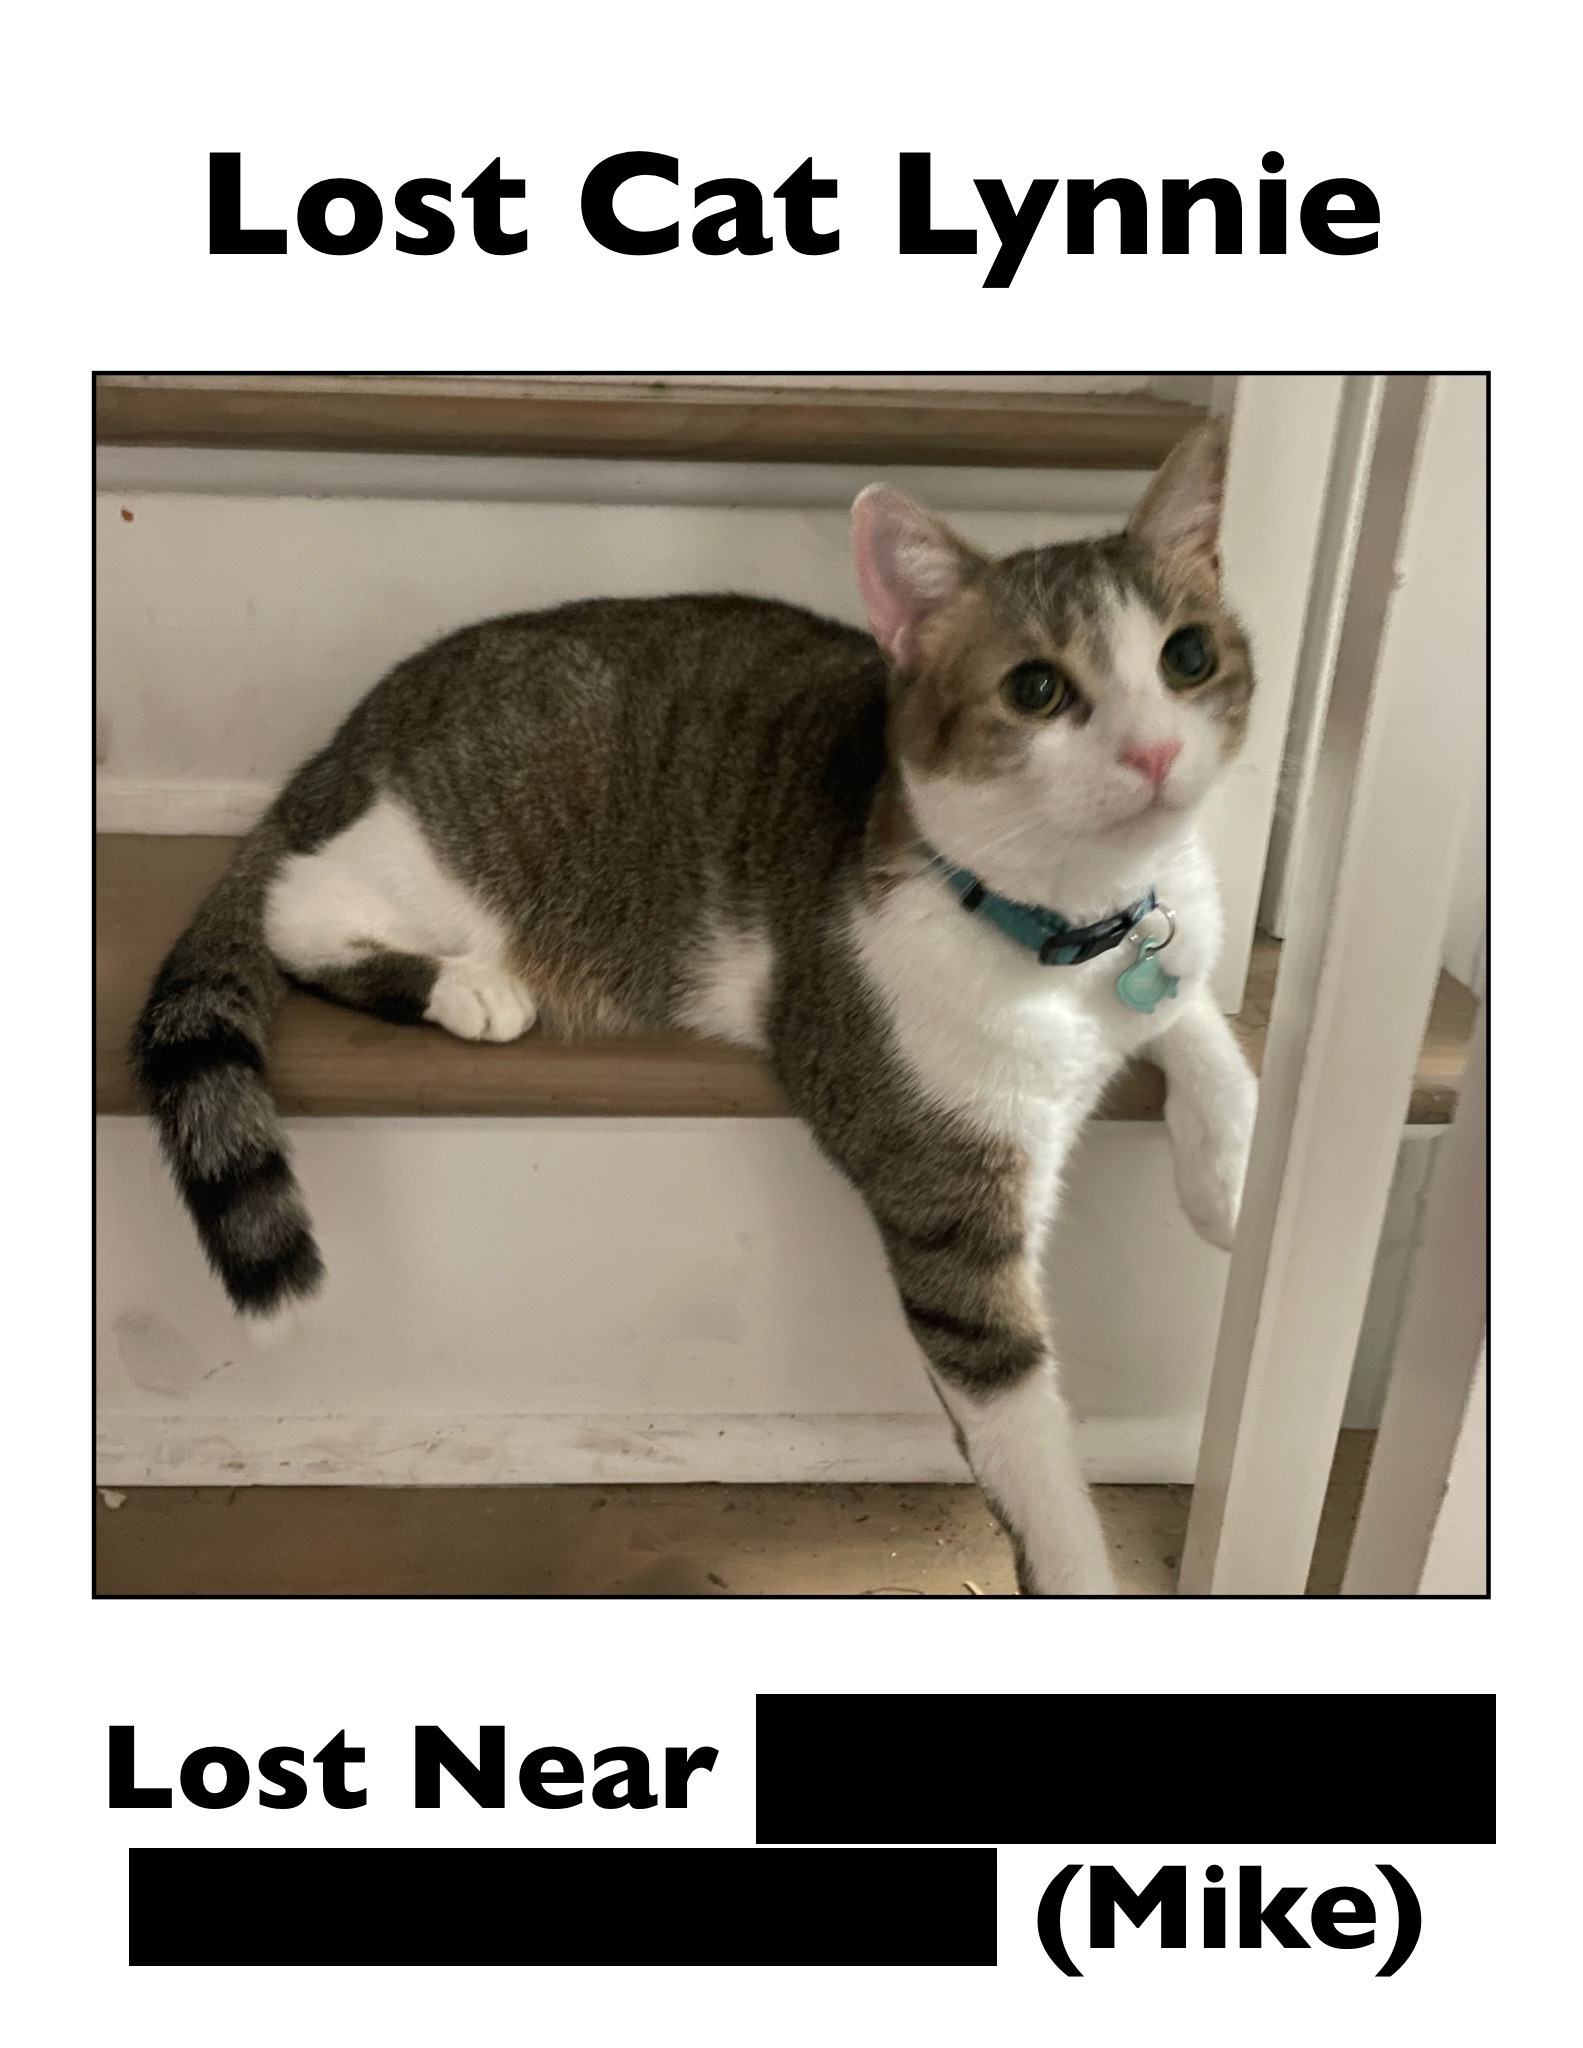 Lynnie Cat Was Likely Catnapped But Is Recovered